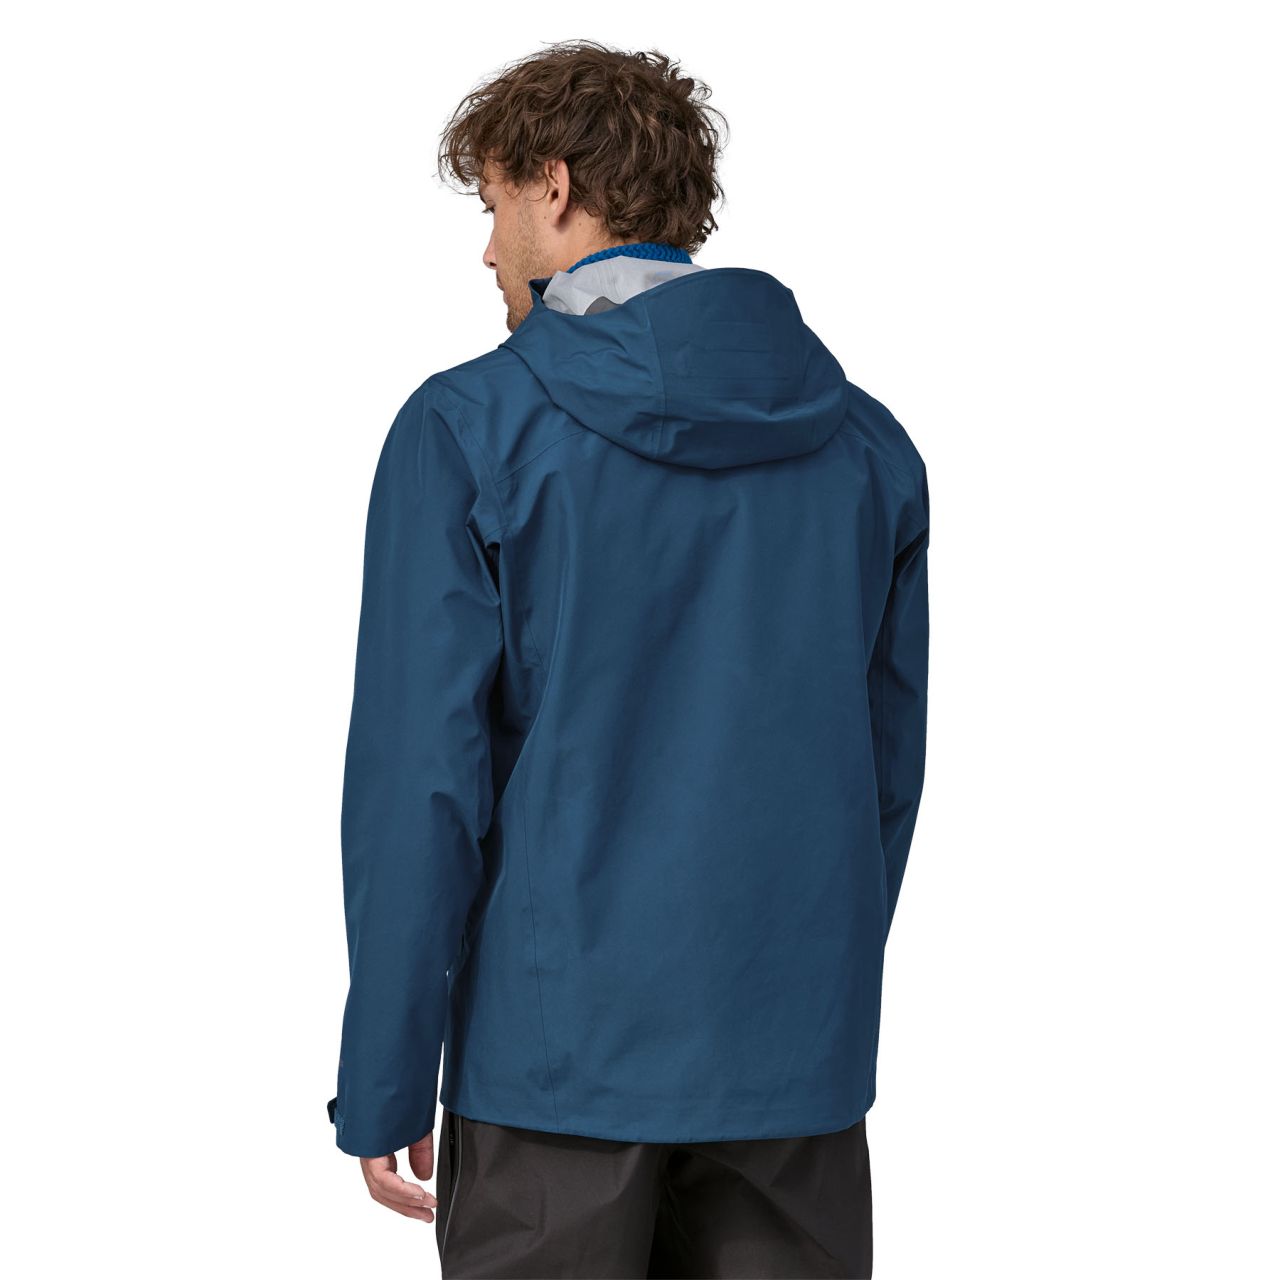 Triolet Jacket - Men's from Patagonia, Technical Shells